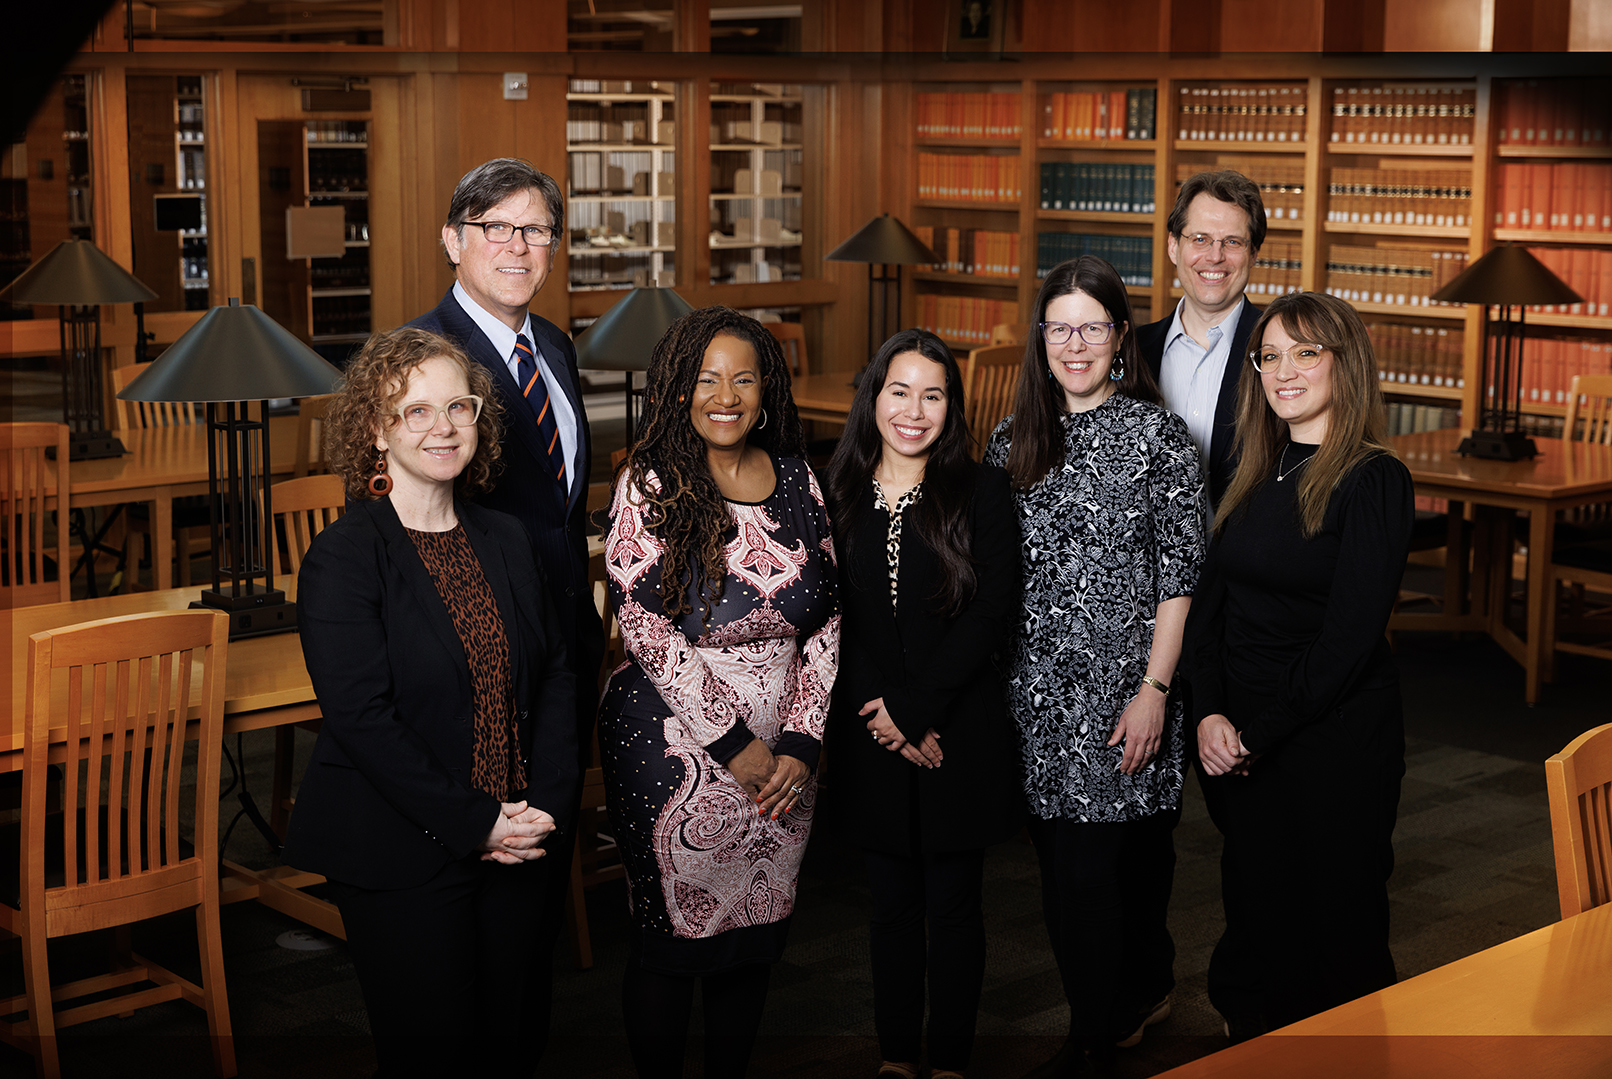 With a four-year, $1 million grant from the Andrew W. Mellon Foundation, Nebraska historians (from left) Katrina Jagodinsky, William Thomas and Jeannette Eileen Jones, with collaborators from the College of Law Genesis Agosto, Jessica Shoemaker, Eric Berger, Danielle Jefferis and (not pictured) Catherine Wilson and Deirdre Cooper Owens, will establish an academic program that enables undergraduate and graduate students to study how various marginalized groups in American history used the law to 